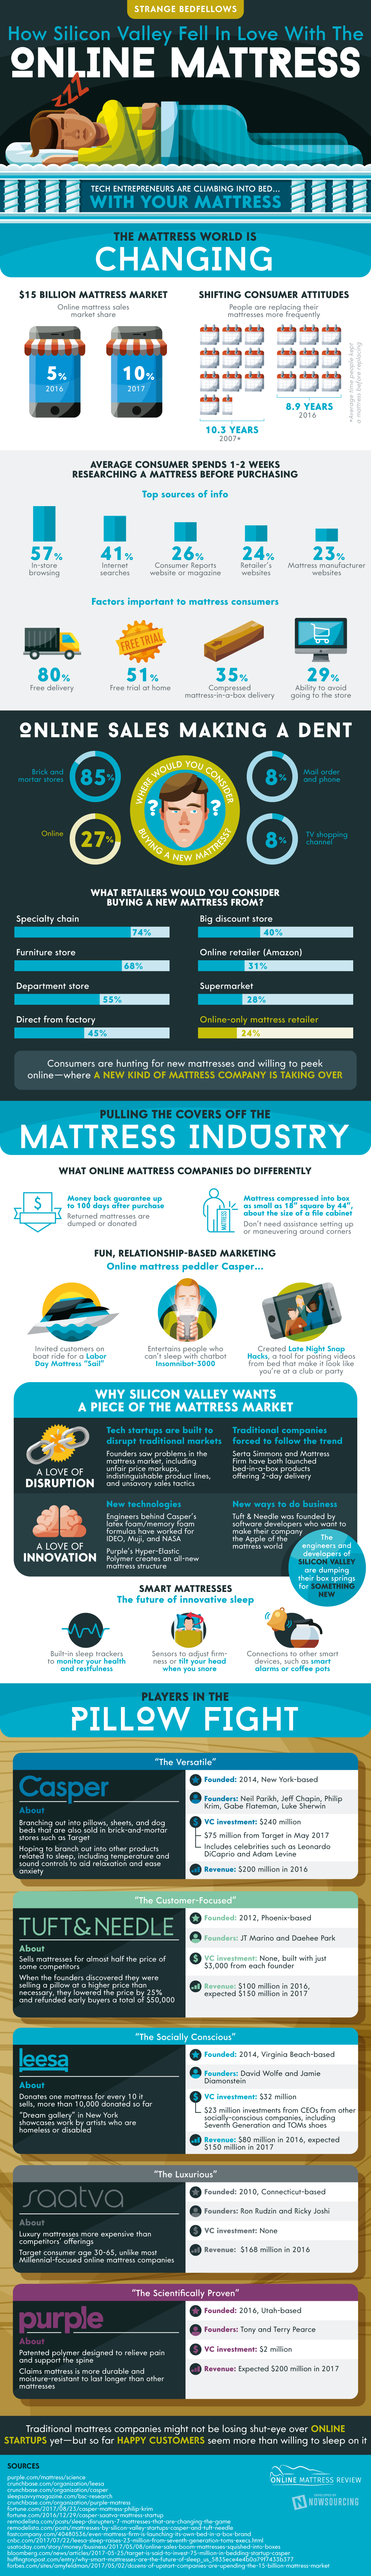 Strange Bedfellows: How Silicon Valley Fell In Love With The Online Mattress